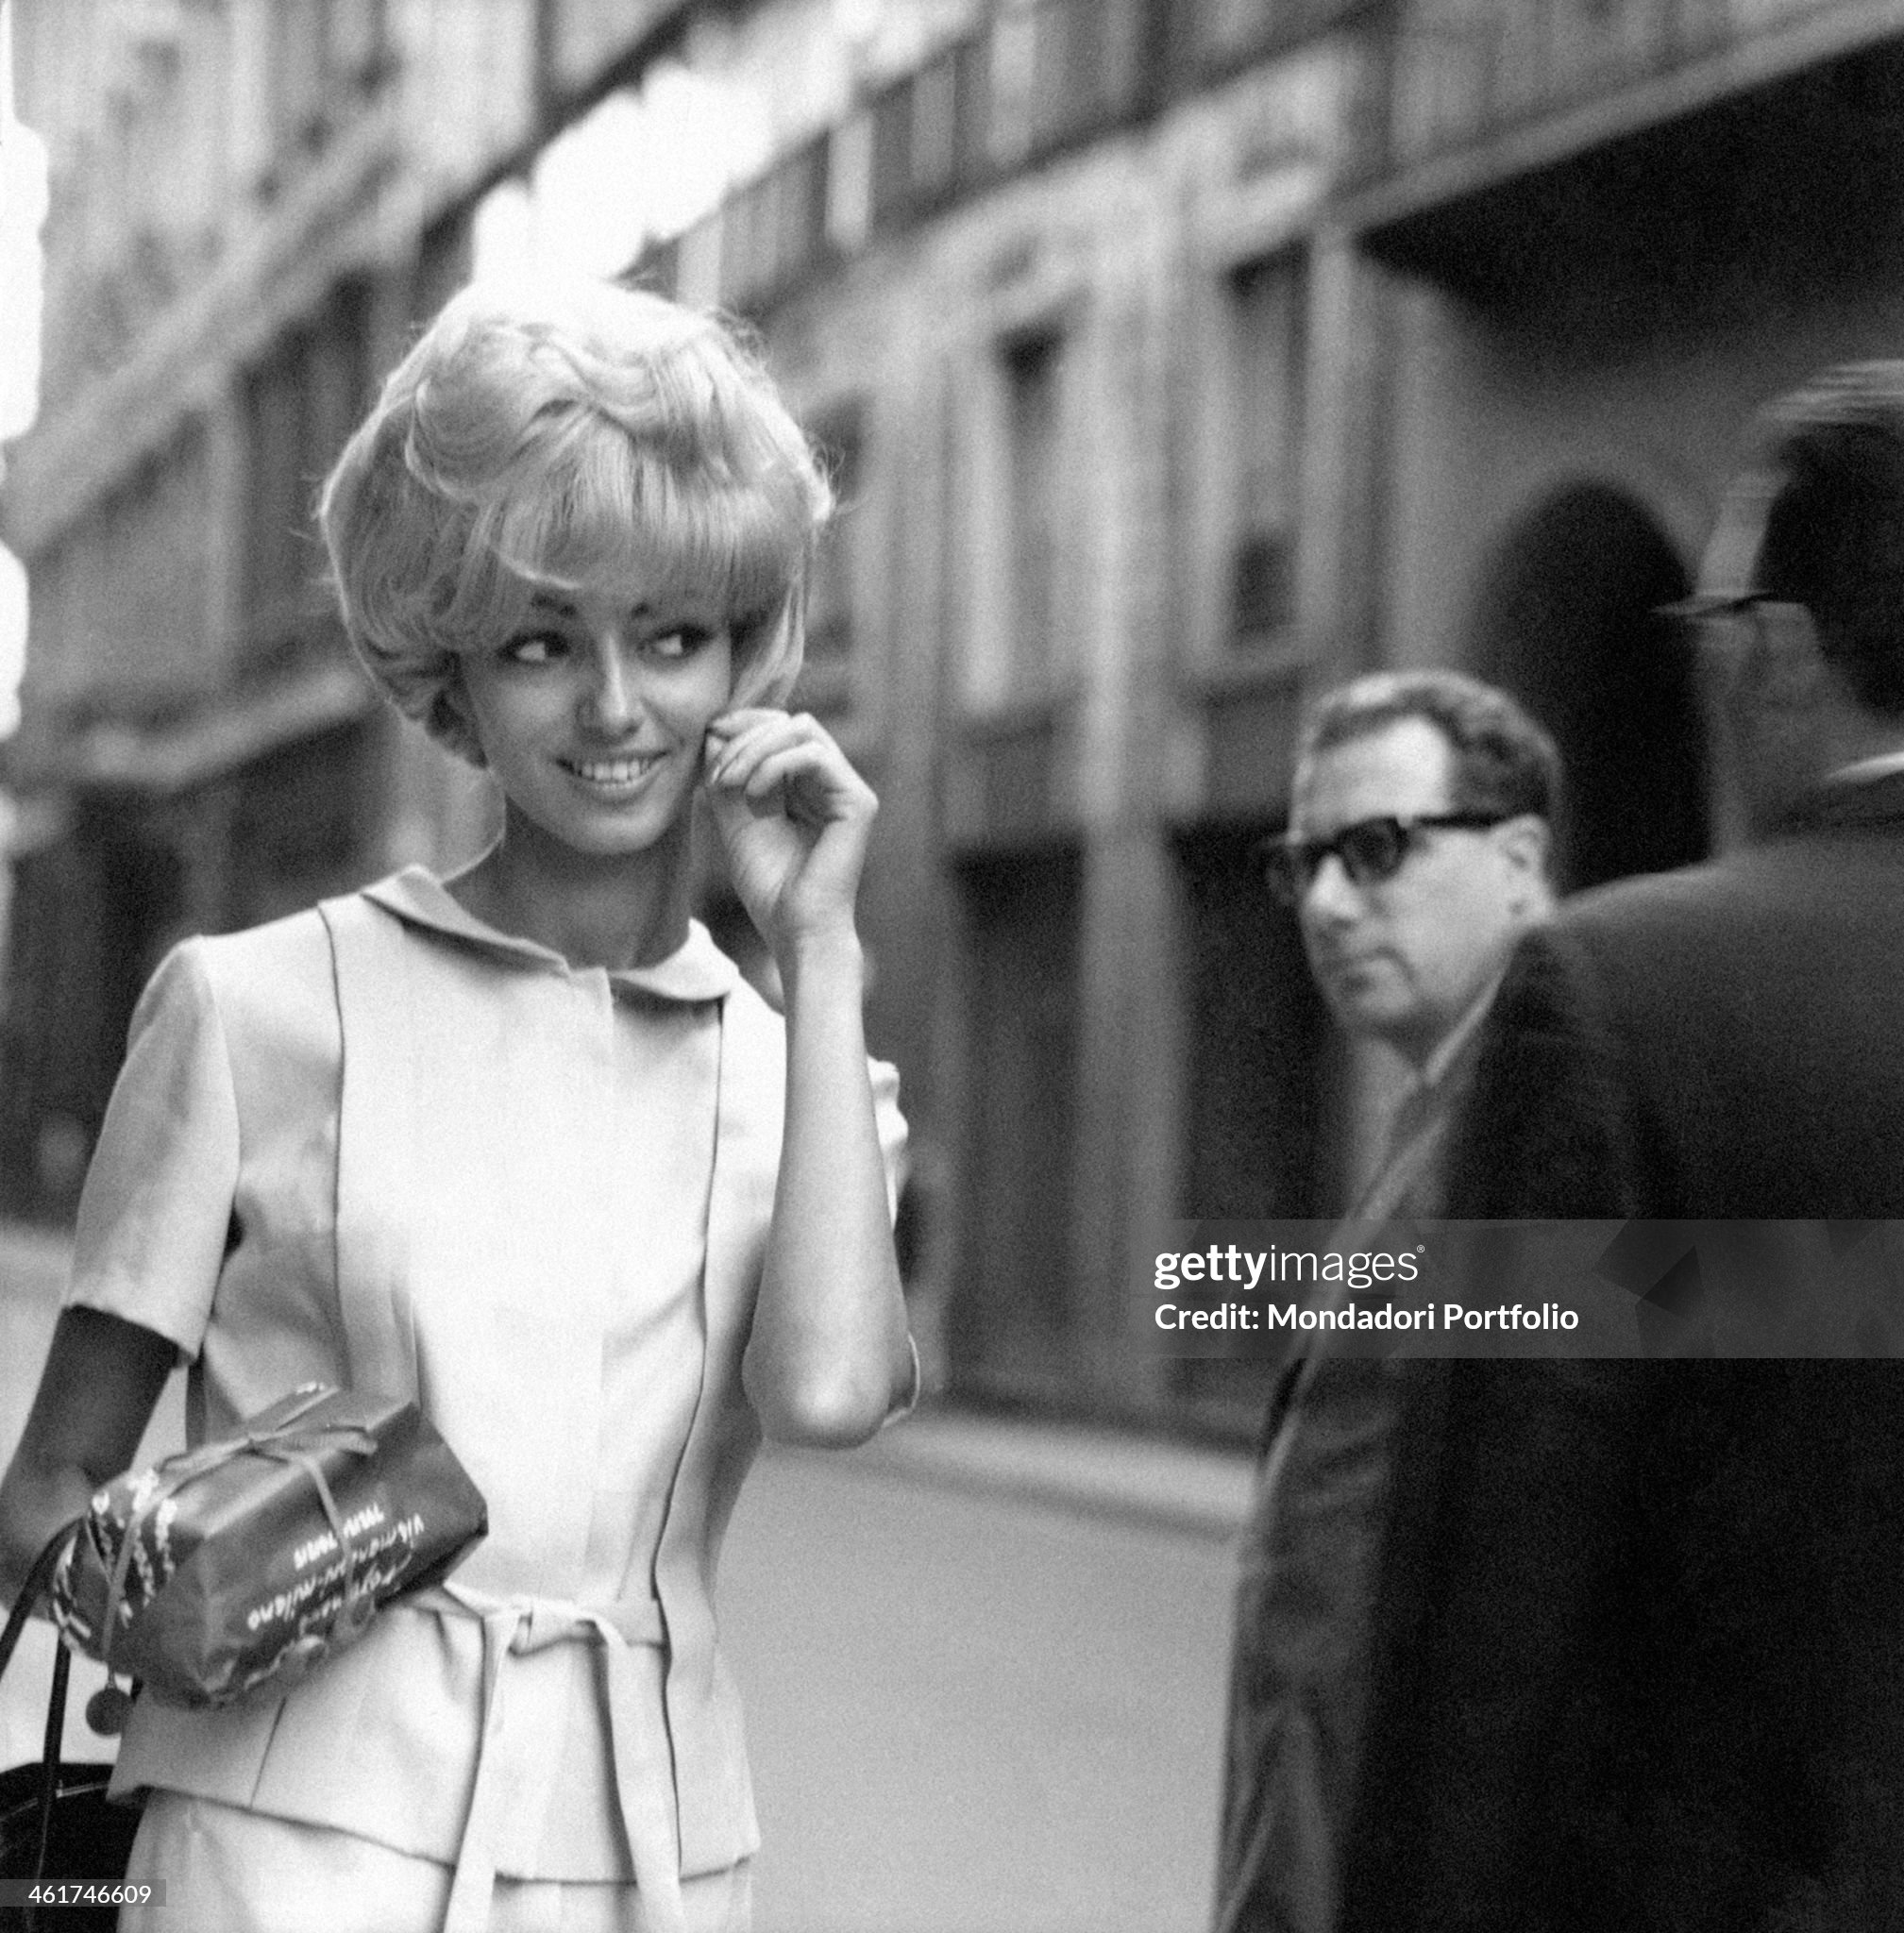 A proud girl showing off her blonde dyed hair in via Monte Napoleone in Milan in 1965.